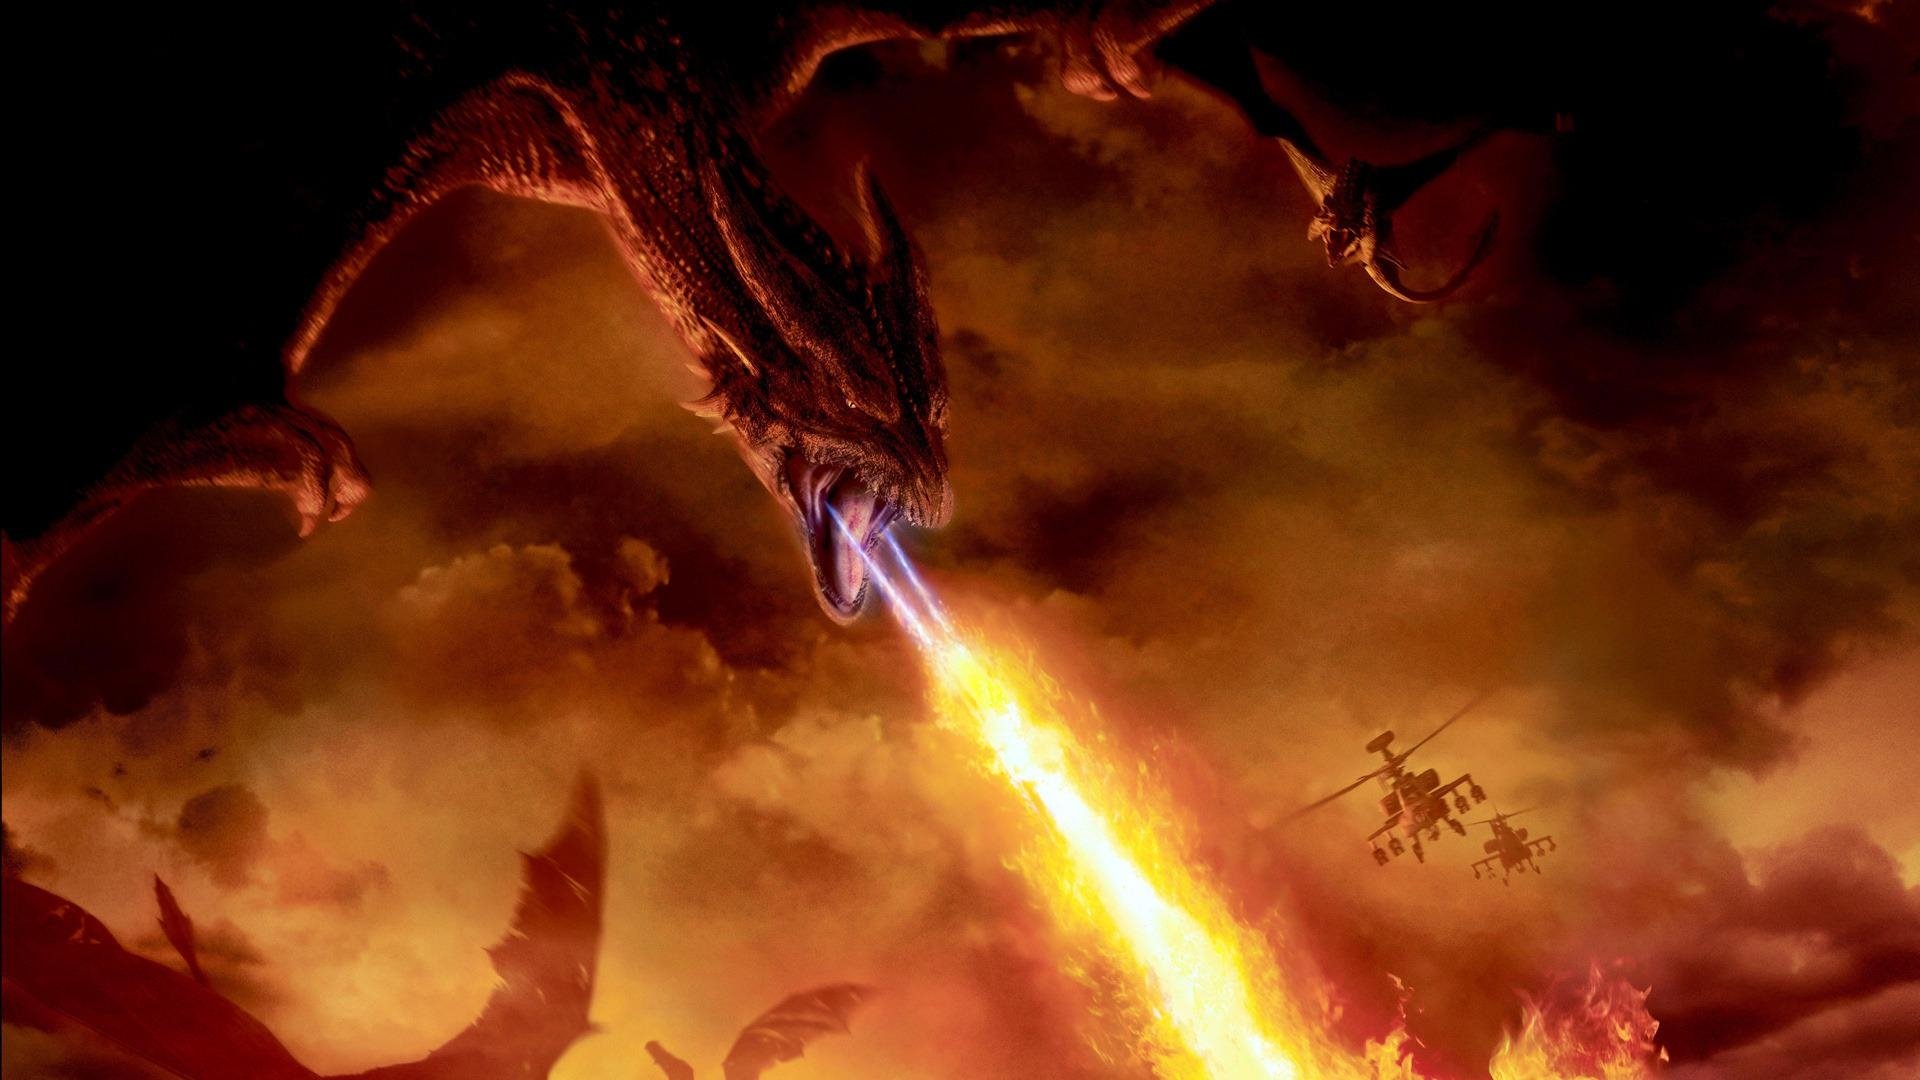 Reign of fire hd paper